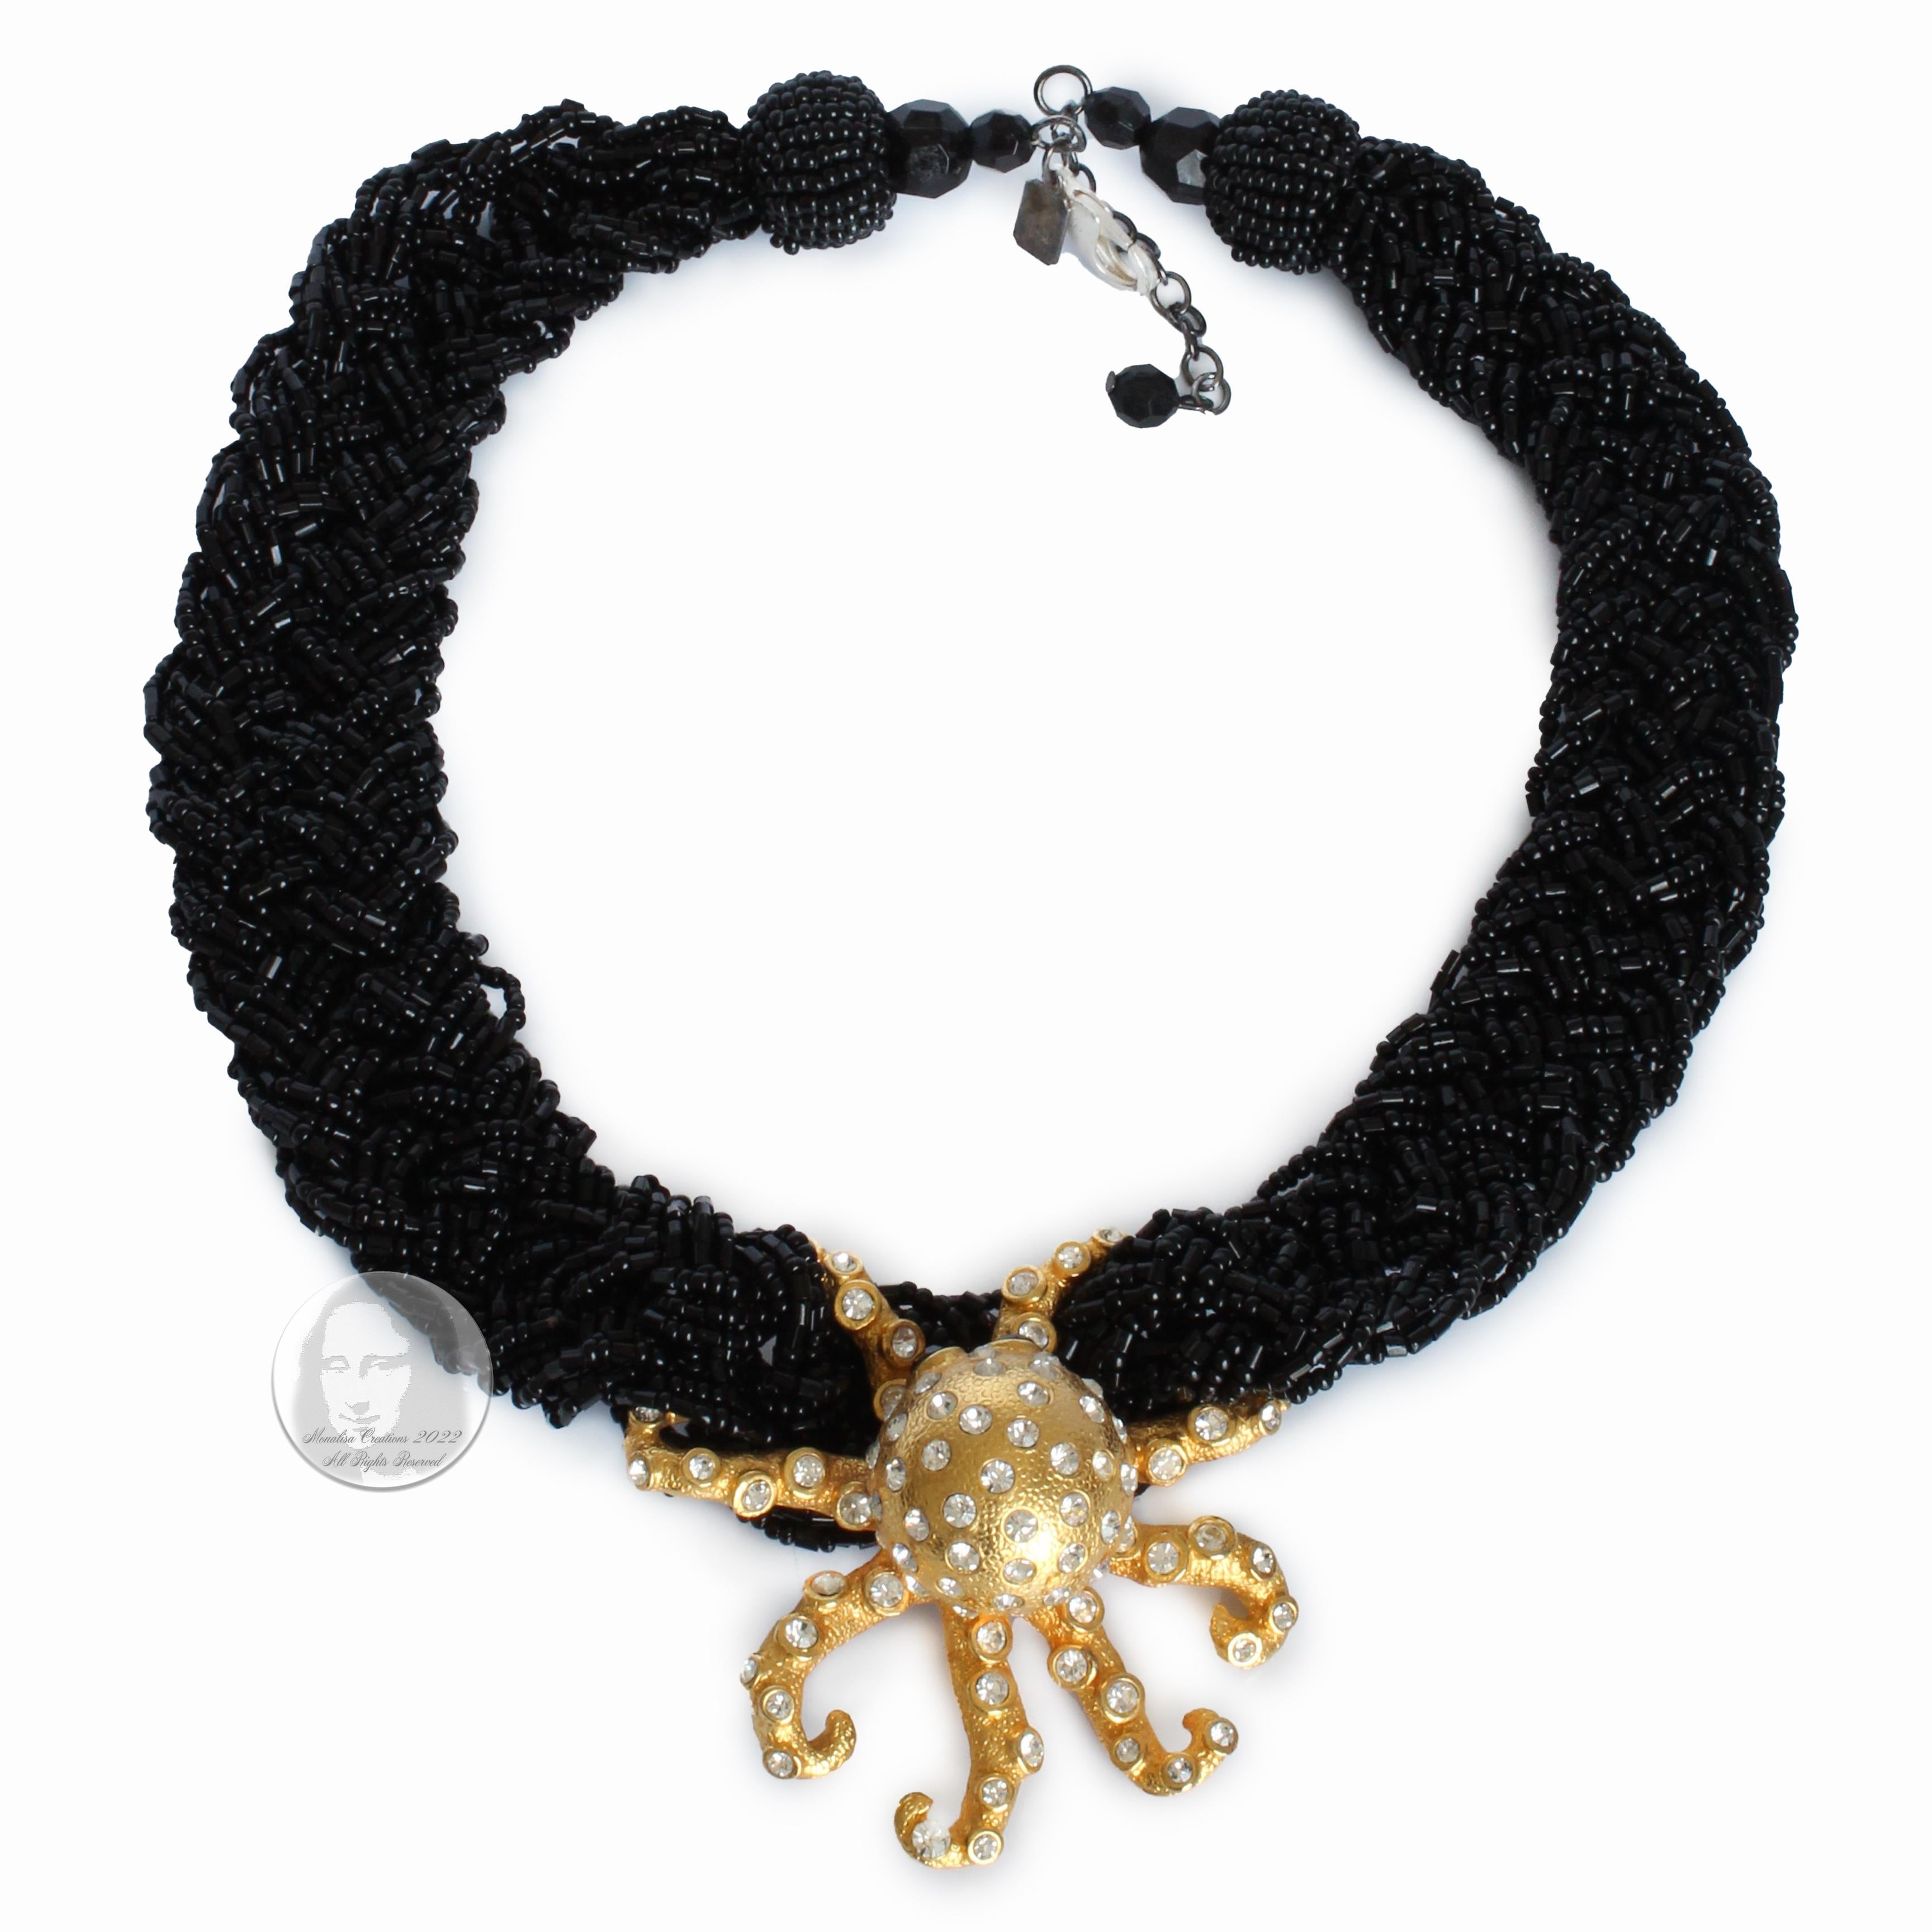 This one-of-a-kind piece was created by Stephanie Lake Design in 2013.  It features an antique, rhinestone-encrusted golden octopus set on a thick black jet bead braided chain.  

One of a kind, this is a spectacular piece, guaranteed to generate